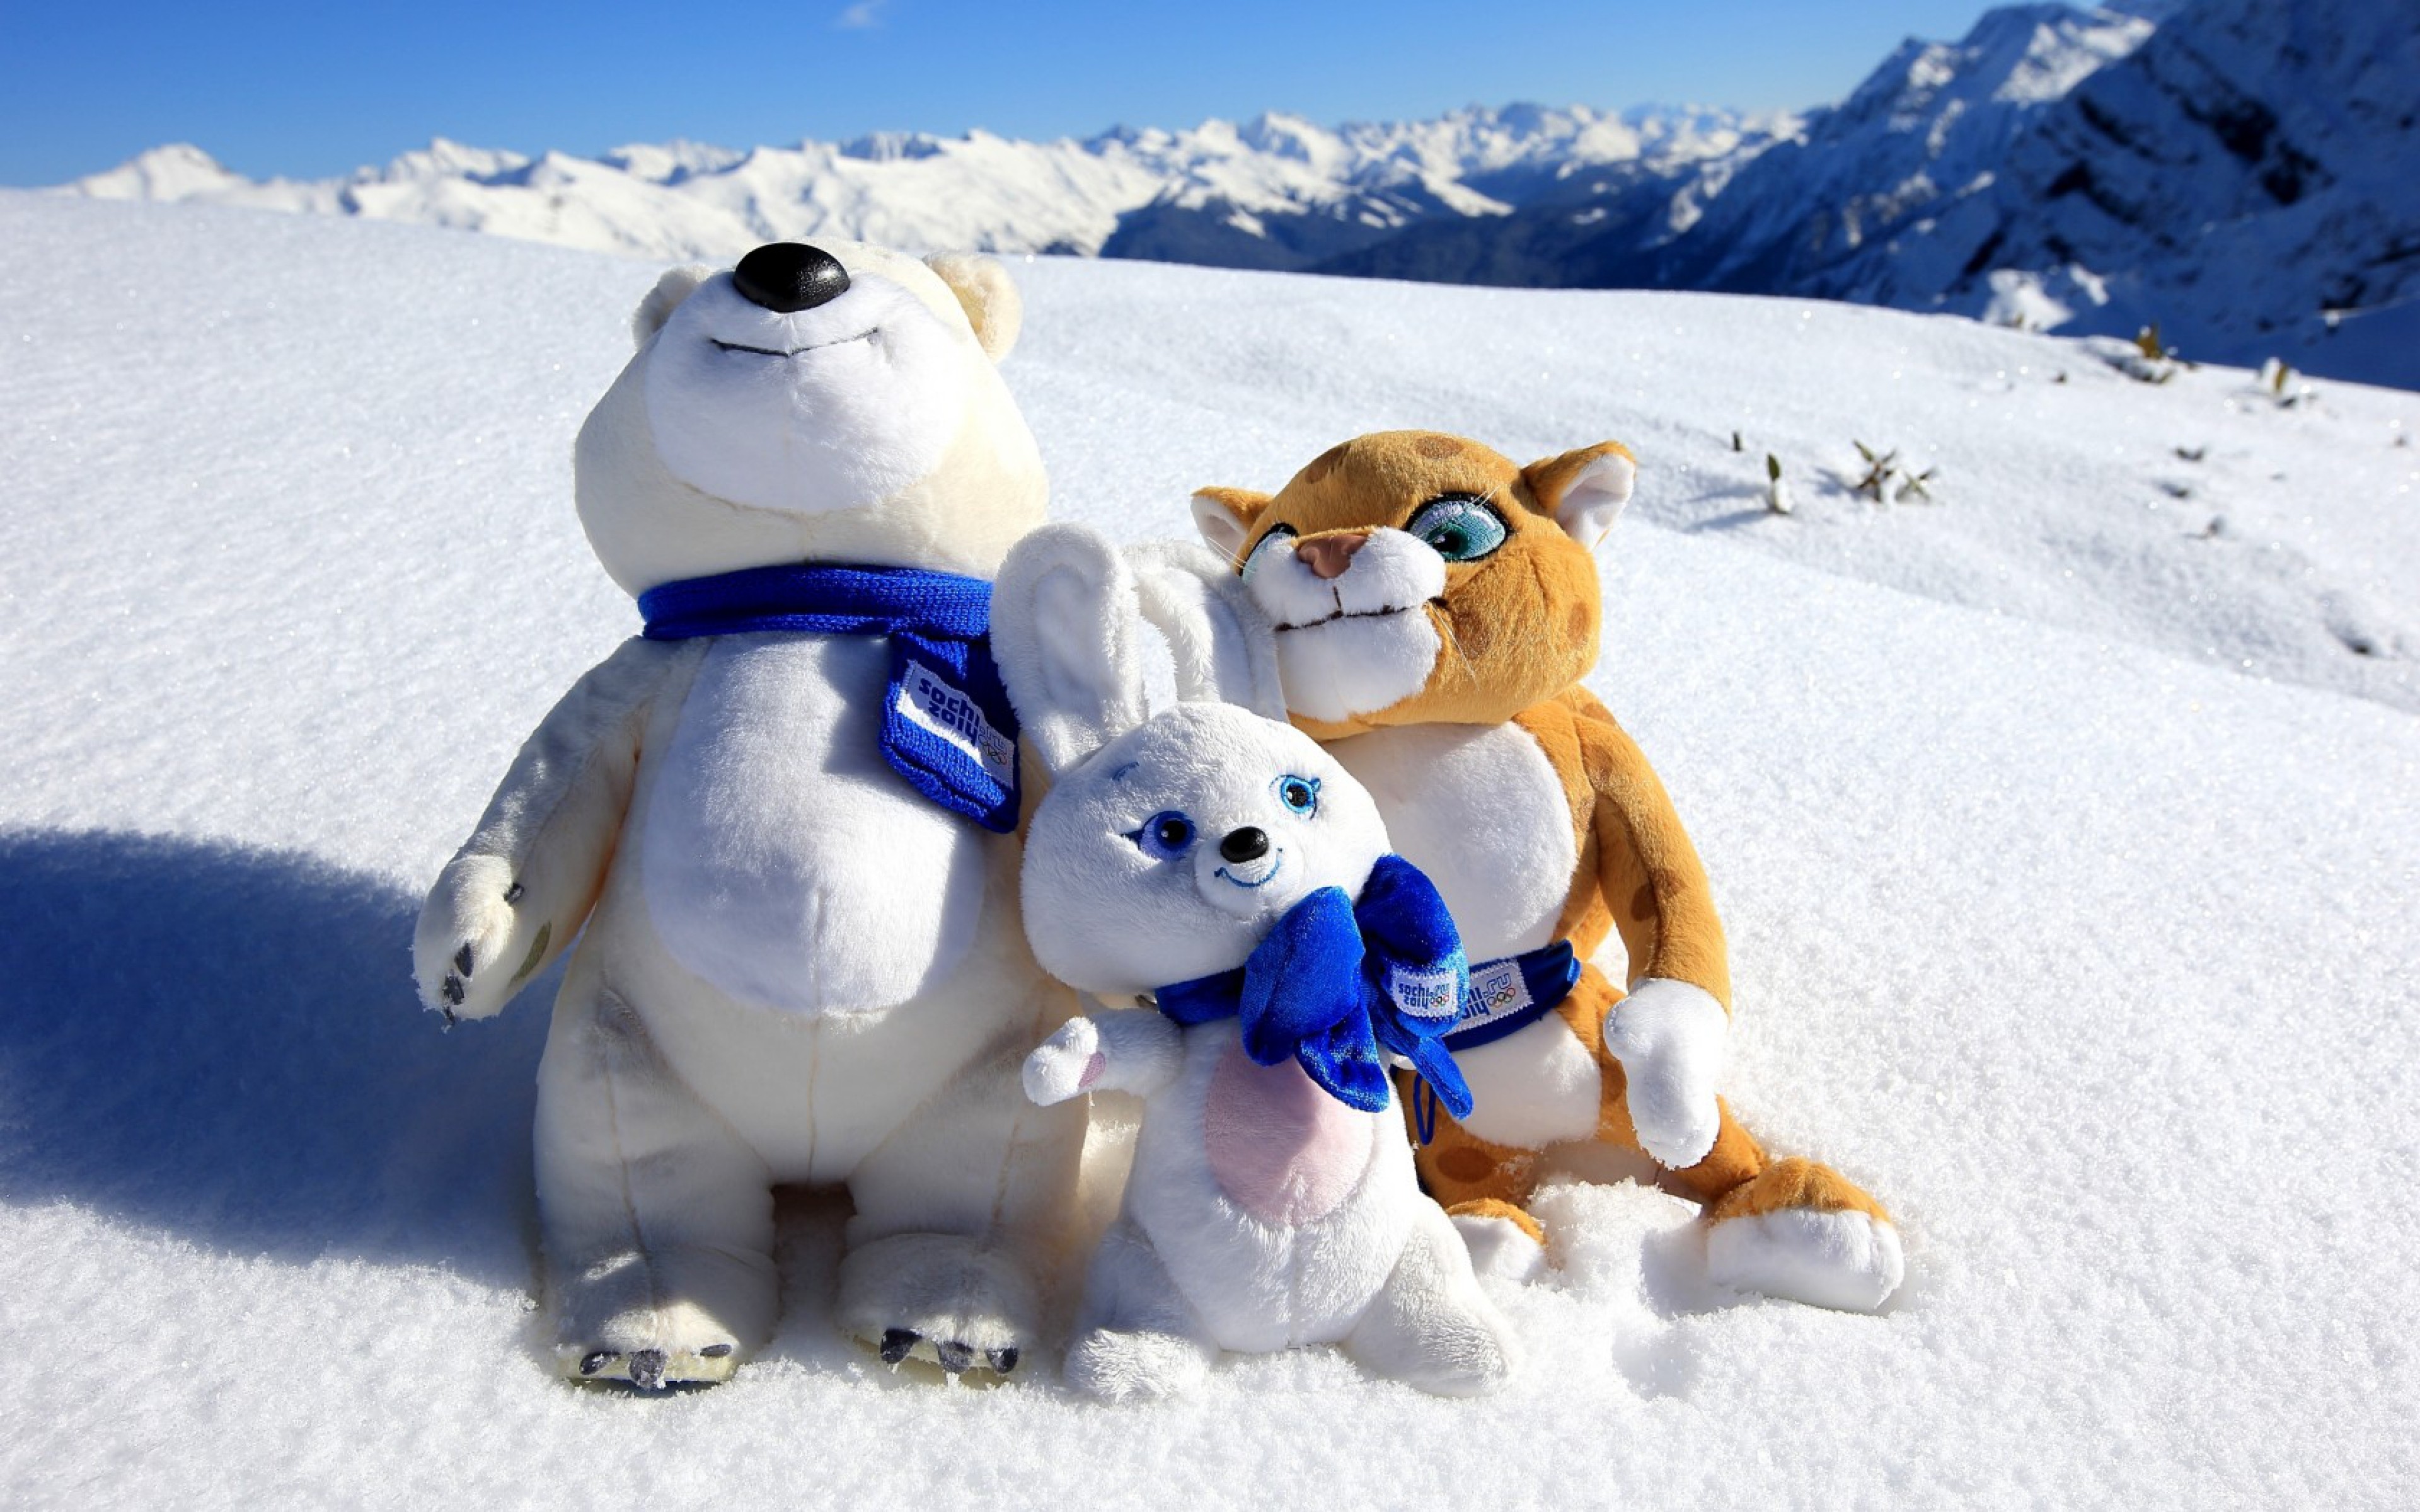 General 3840x2400 snow toys Sochi Olympic Games plush toy outdoors